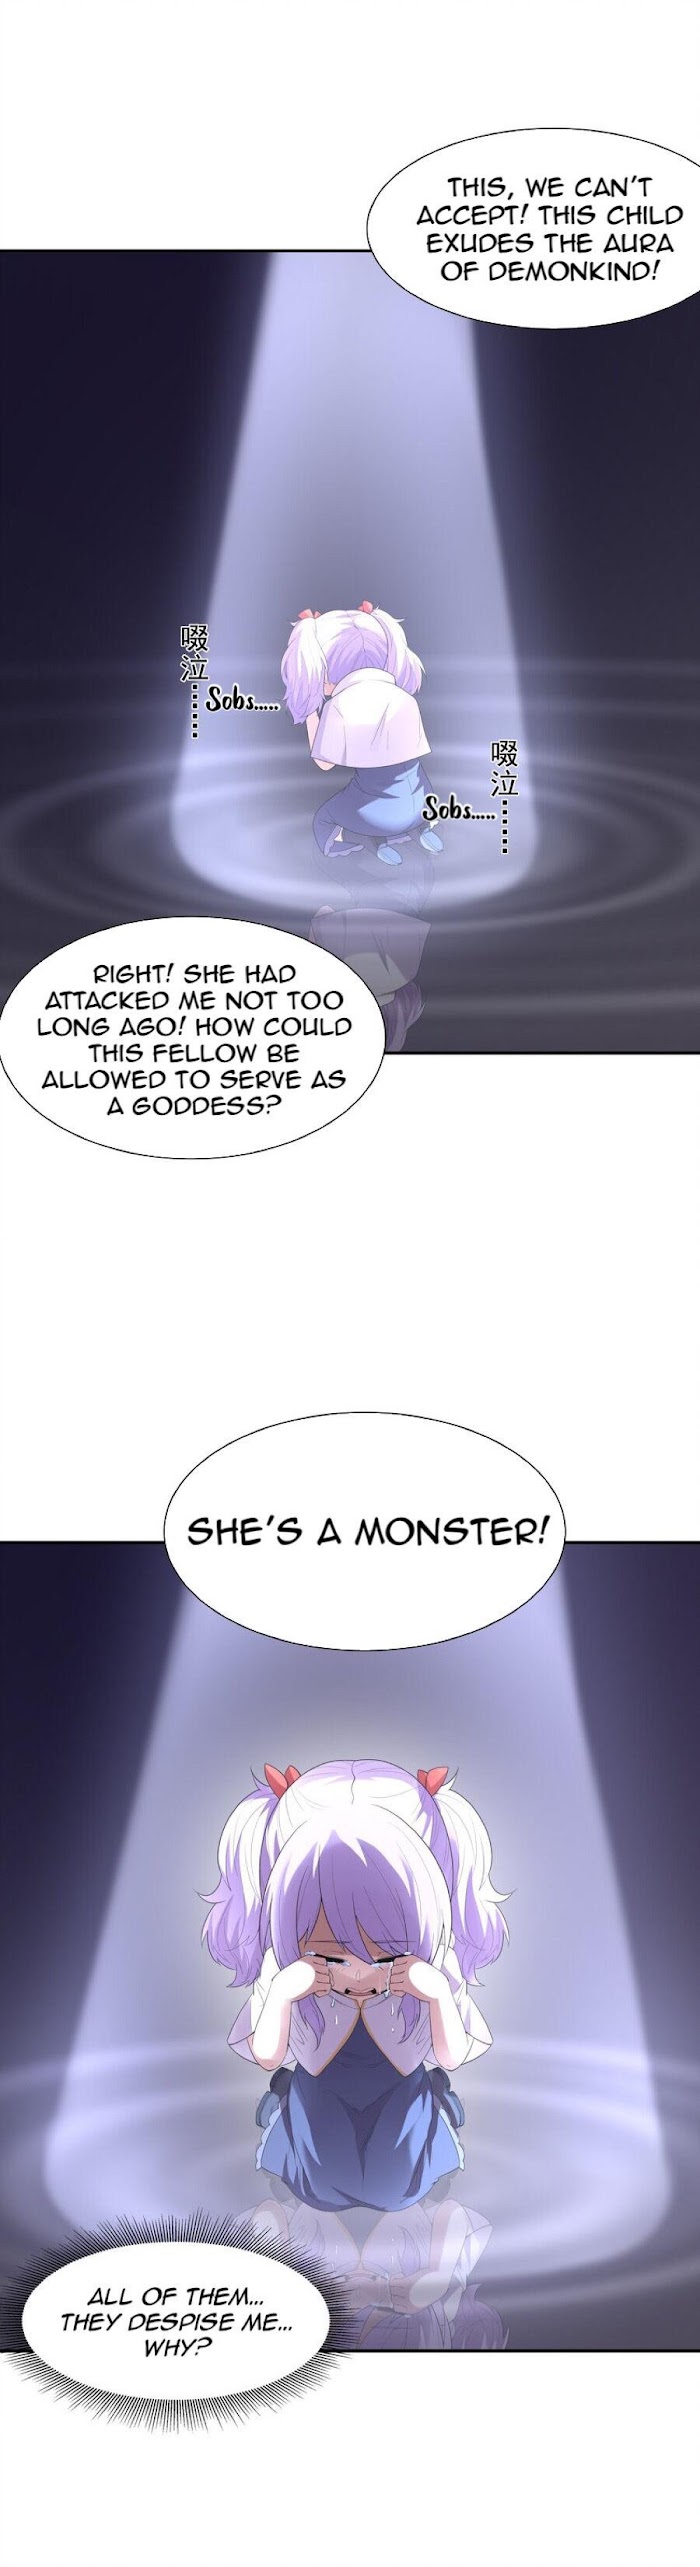 My Harem Is Entirely Female Demon Villains - Page 2